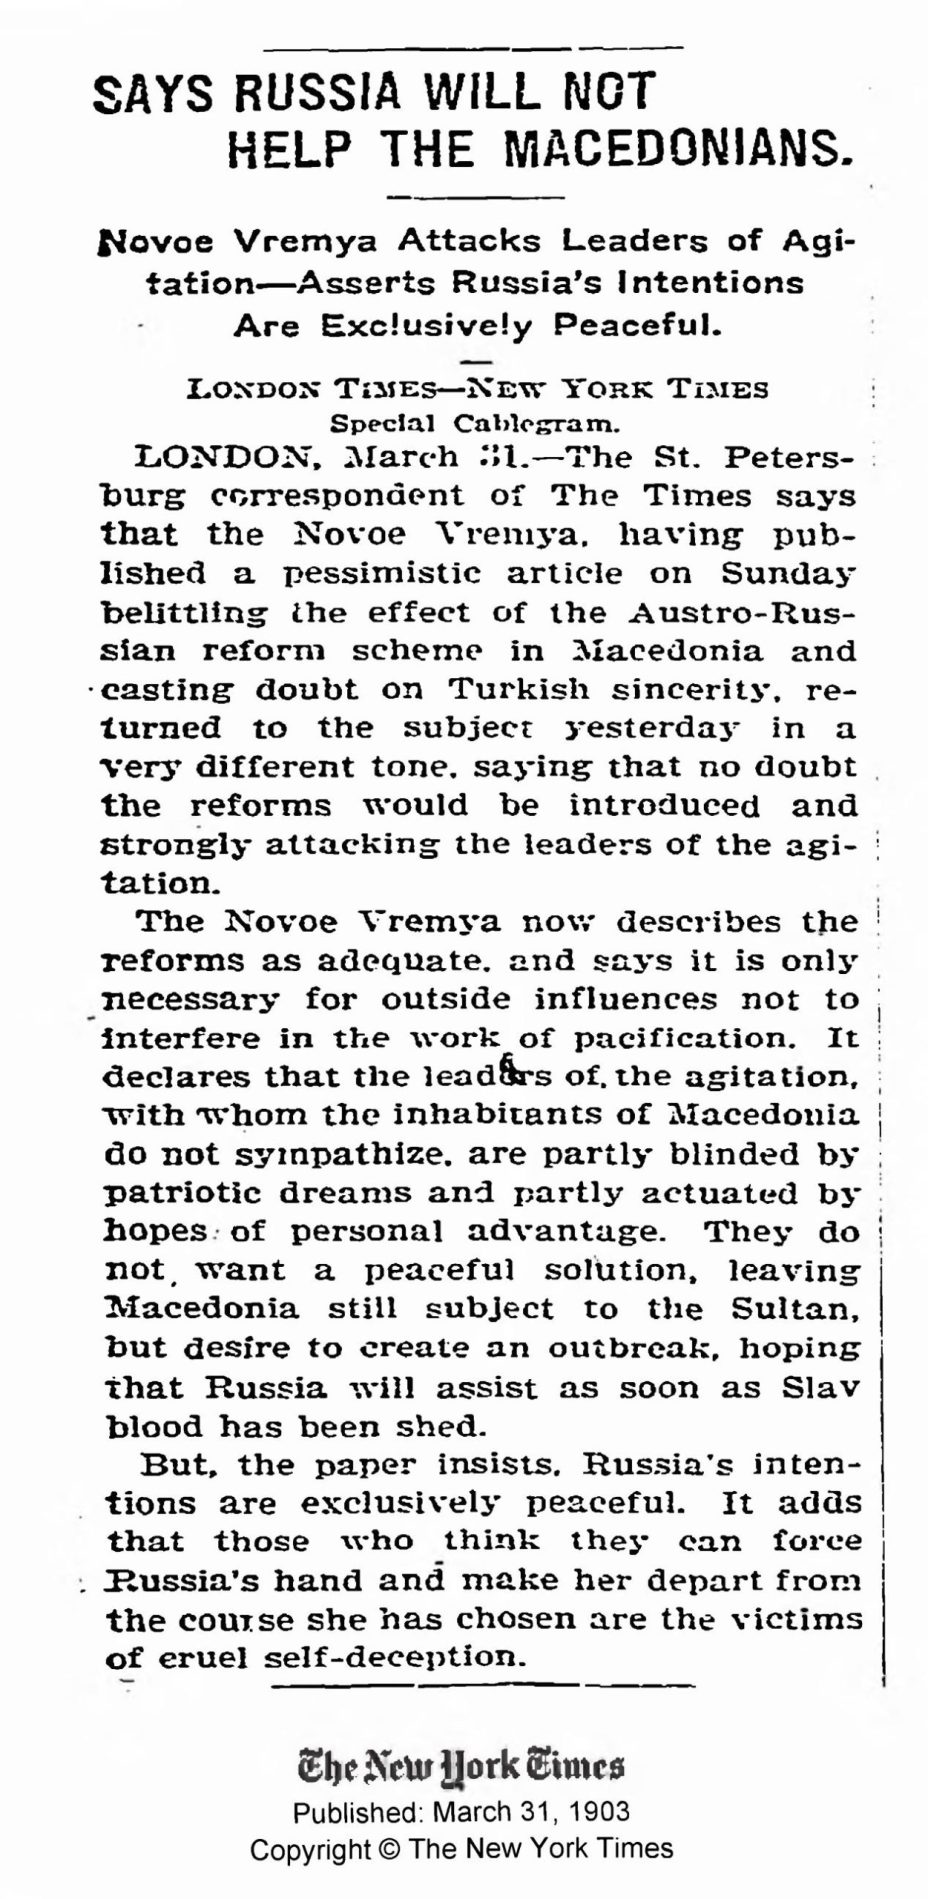 1903.03.31_The New York Times - Russia will not help the Macedonians